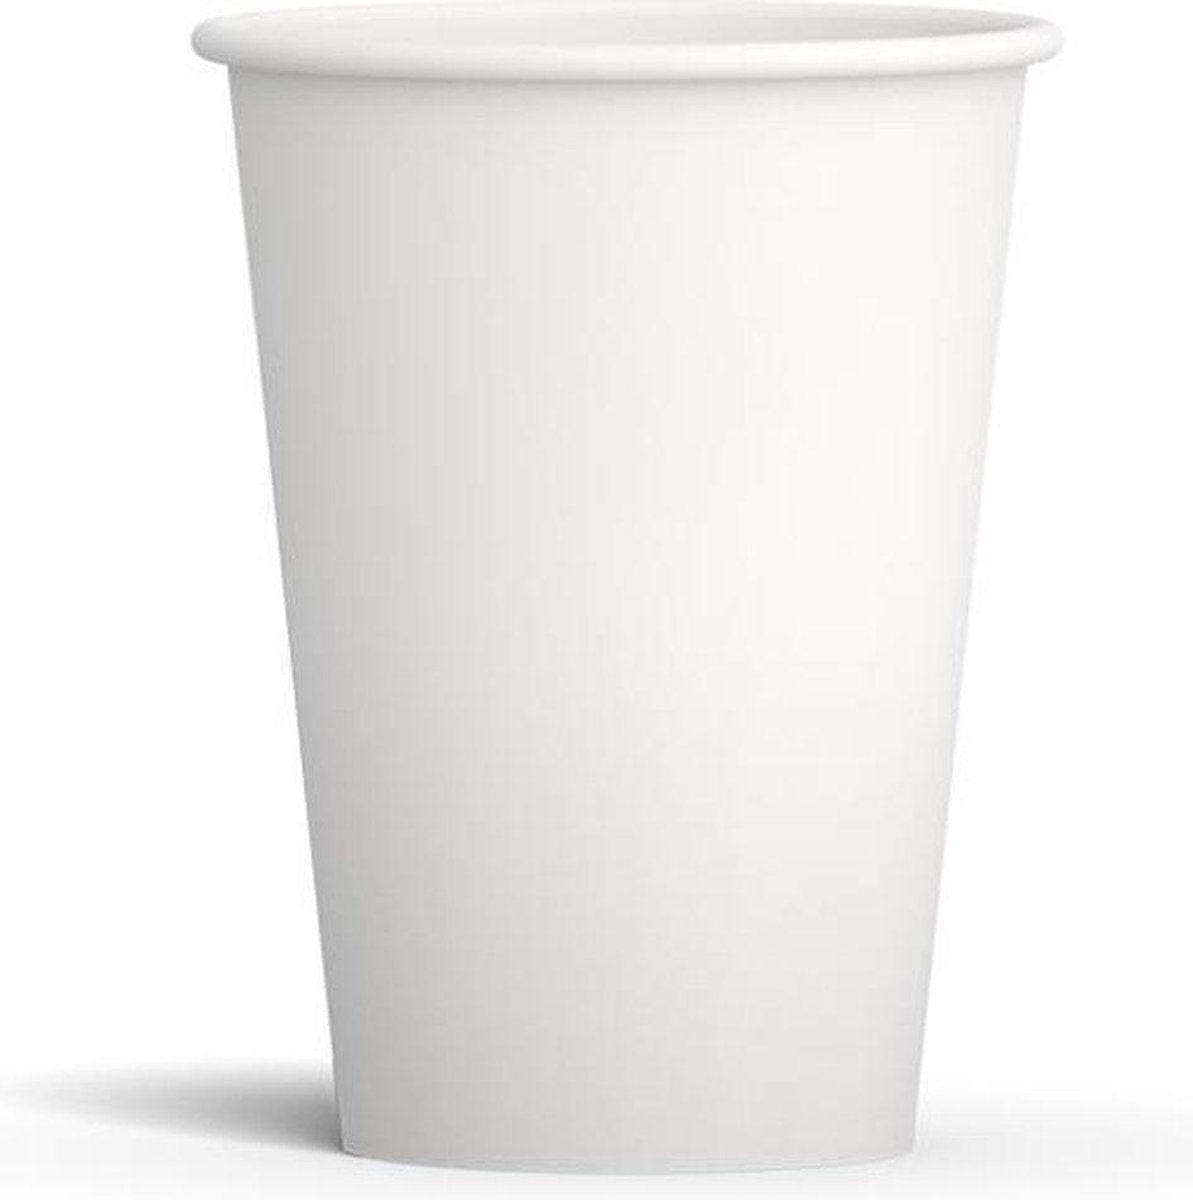 Drinking cup - Coffee cup - Disposable cardboard cup 200ml 100 pieces White